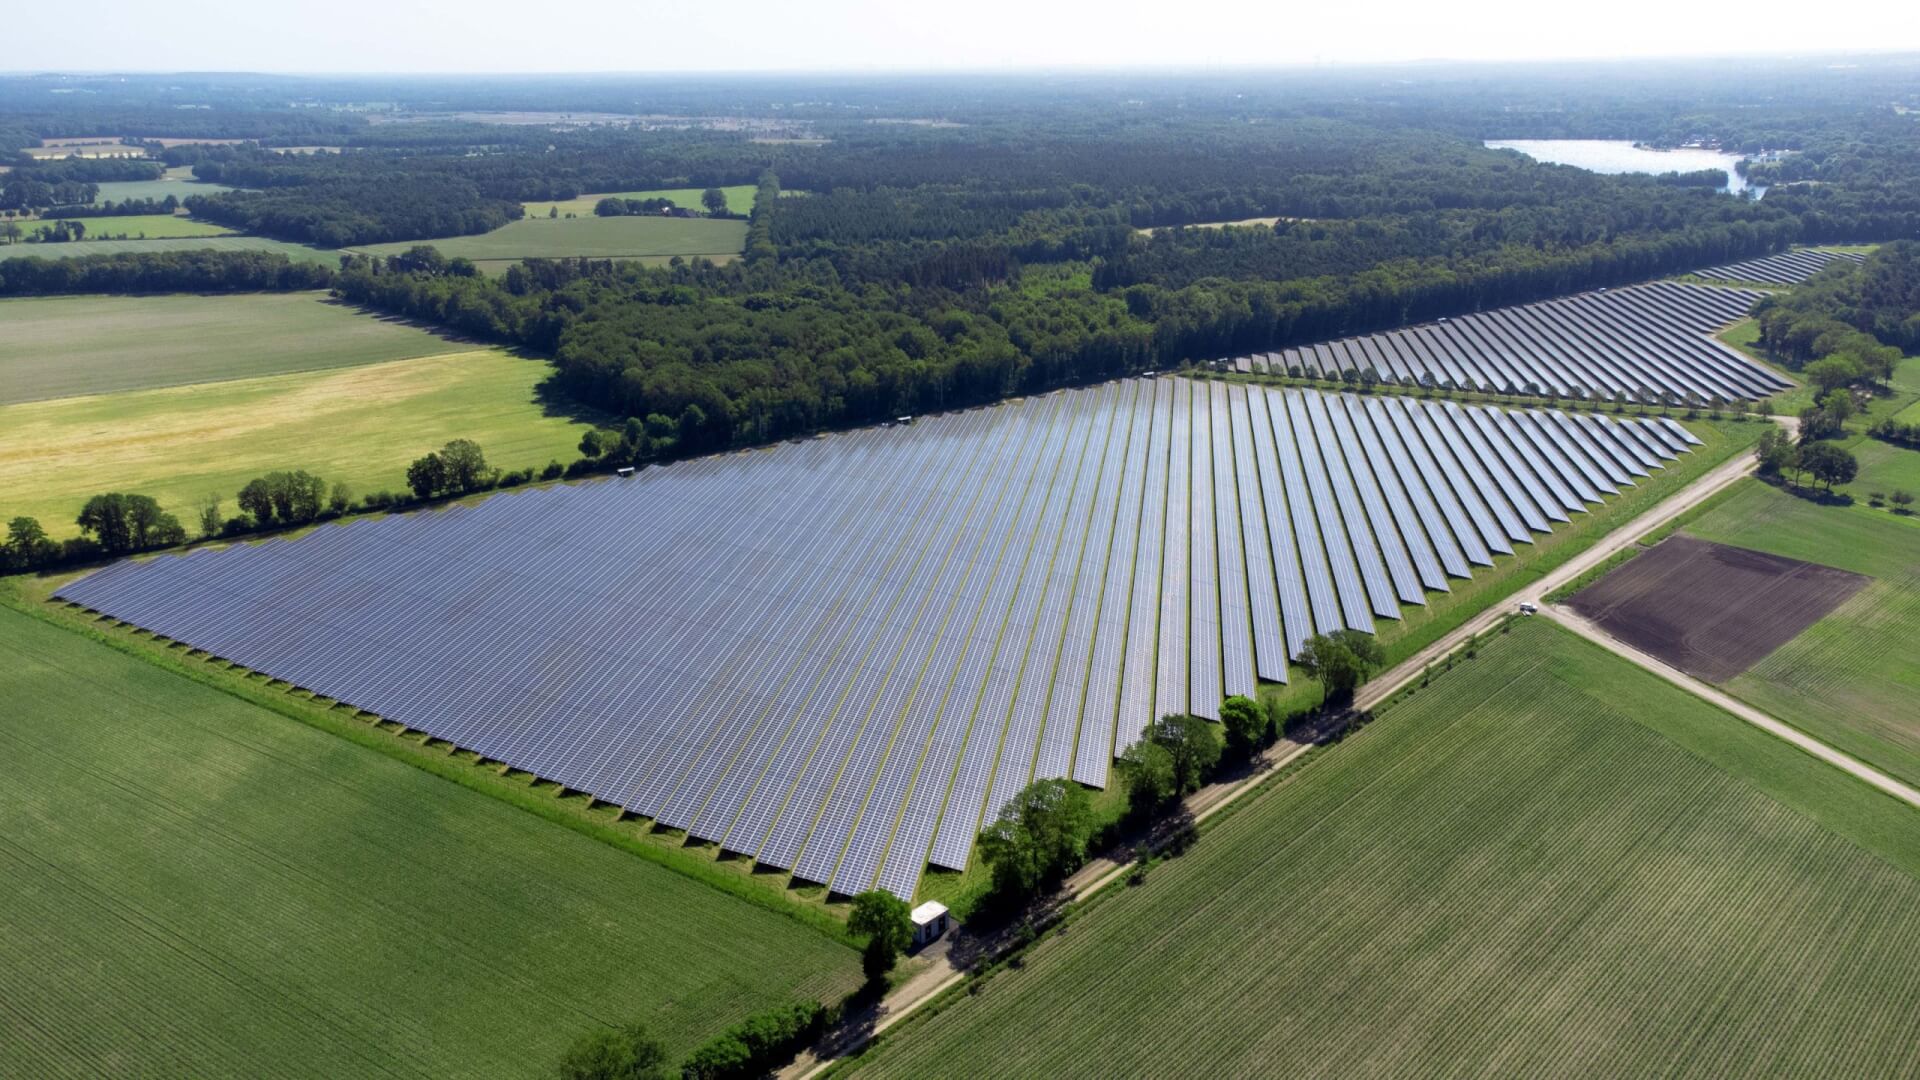 Drone shot of a large-scale solar farm near Losser in the Netherlands